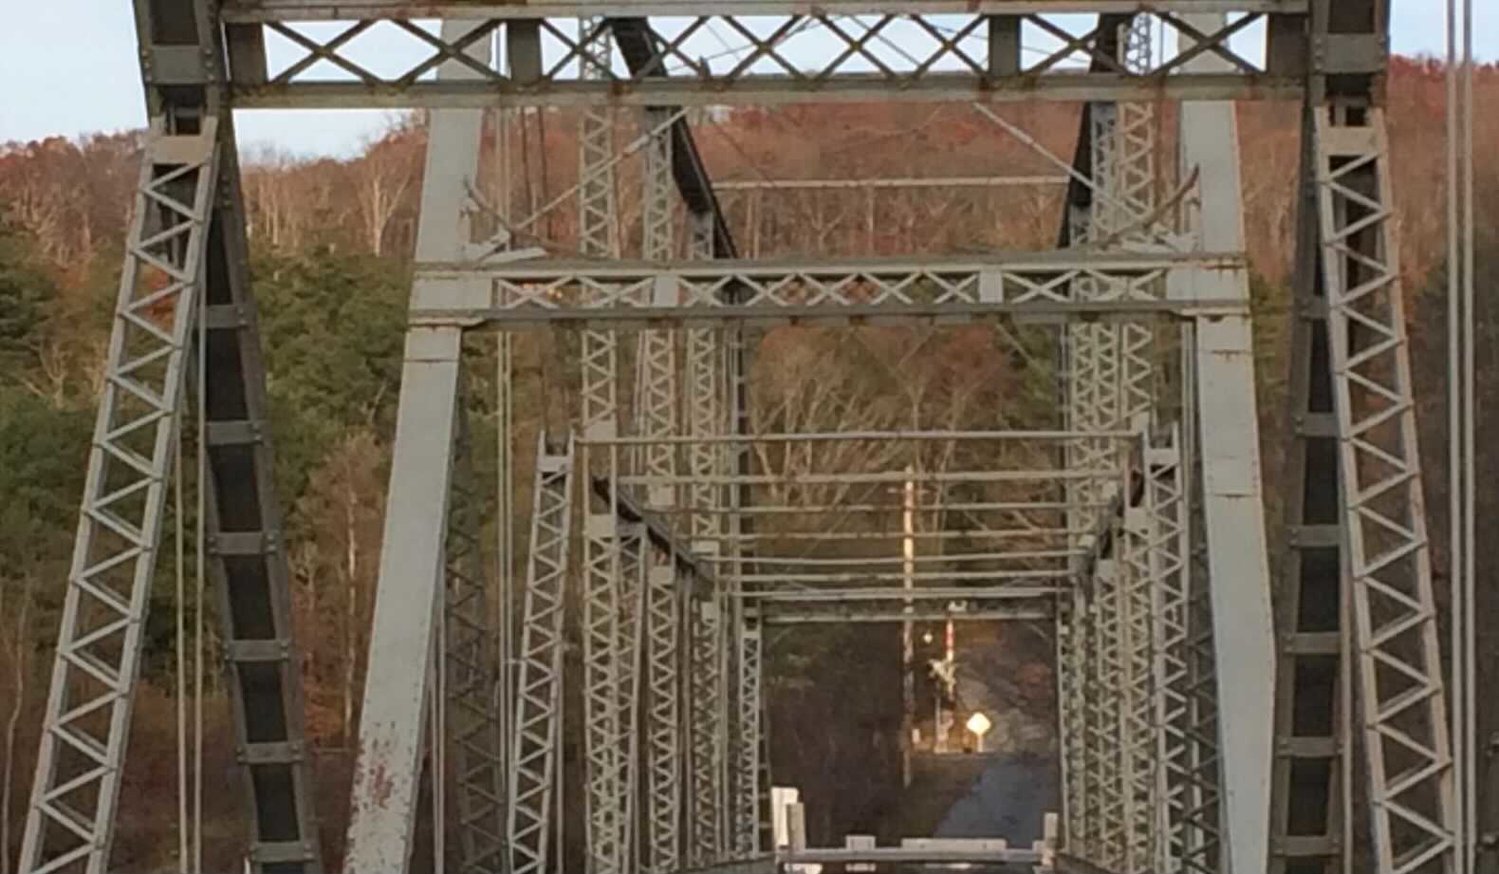 A close-up view of the trusses that make up the Skinners Falls Bridge.